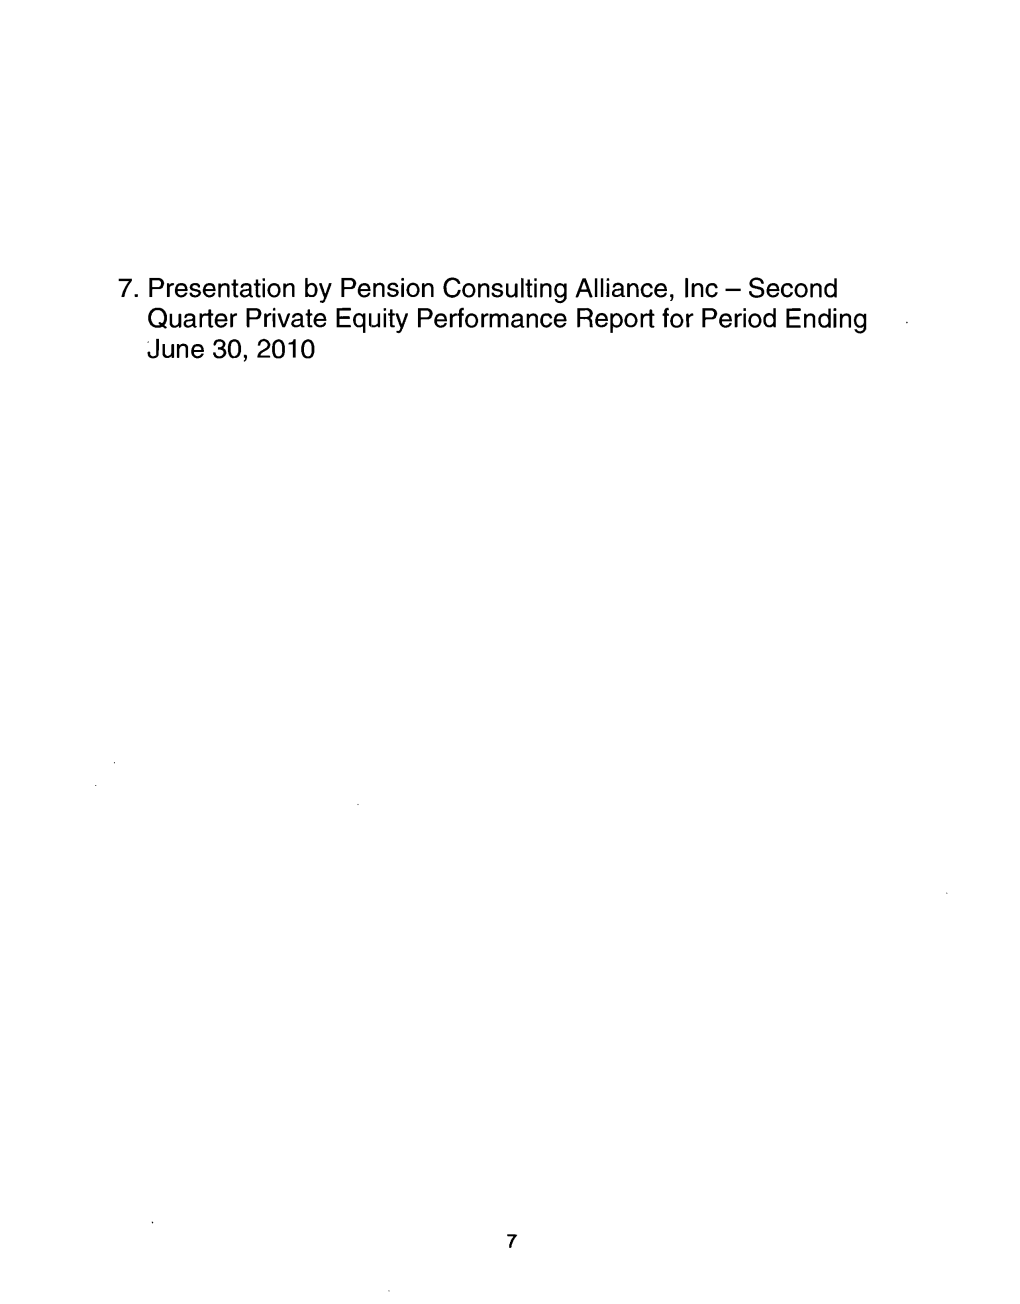 Private Equity Program Performance Report